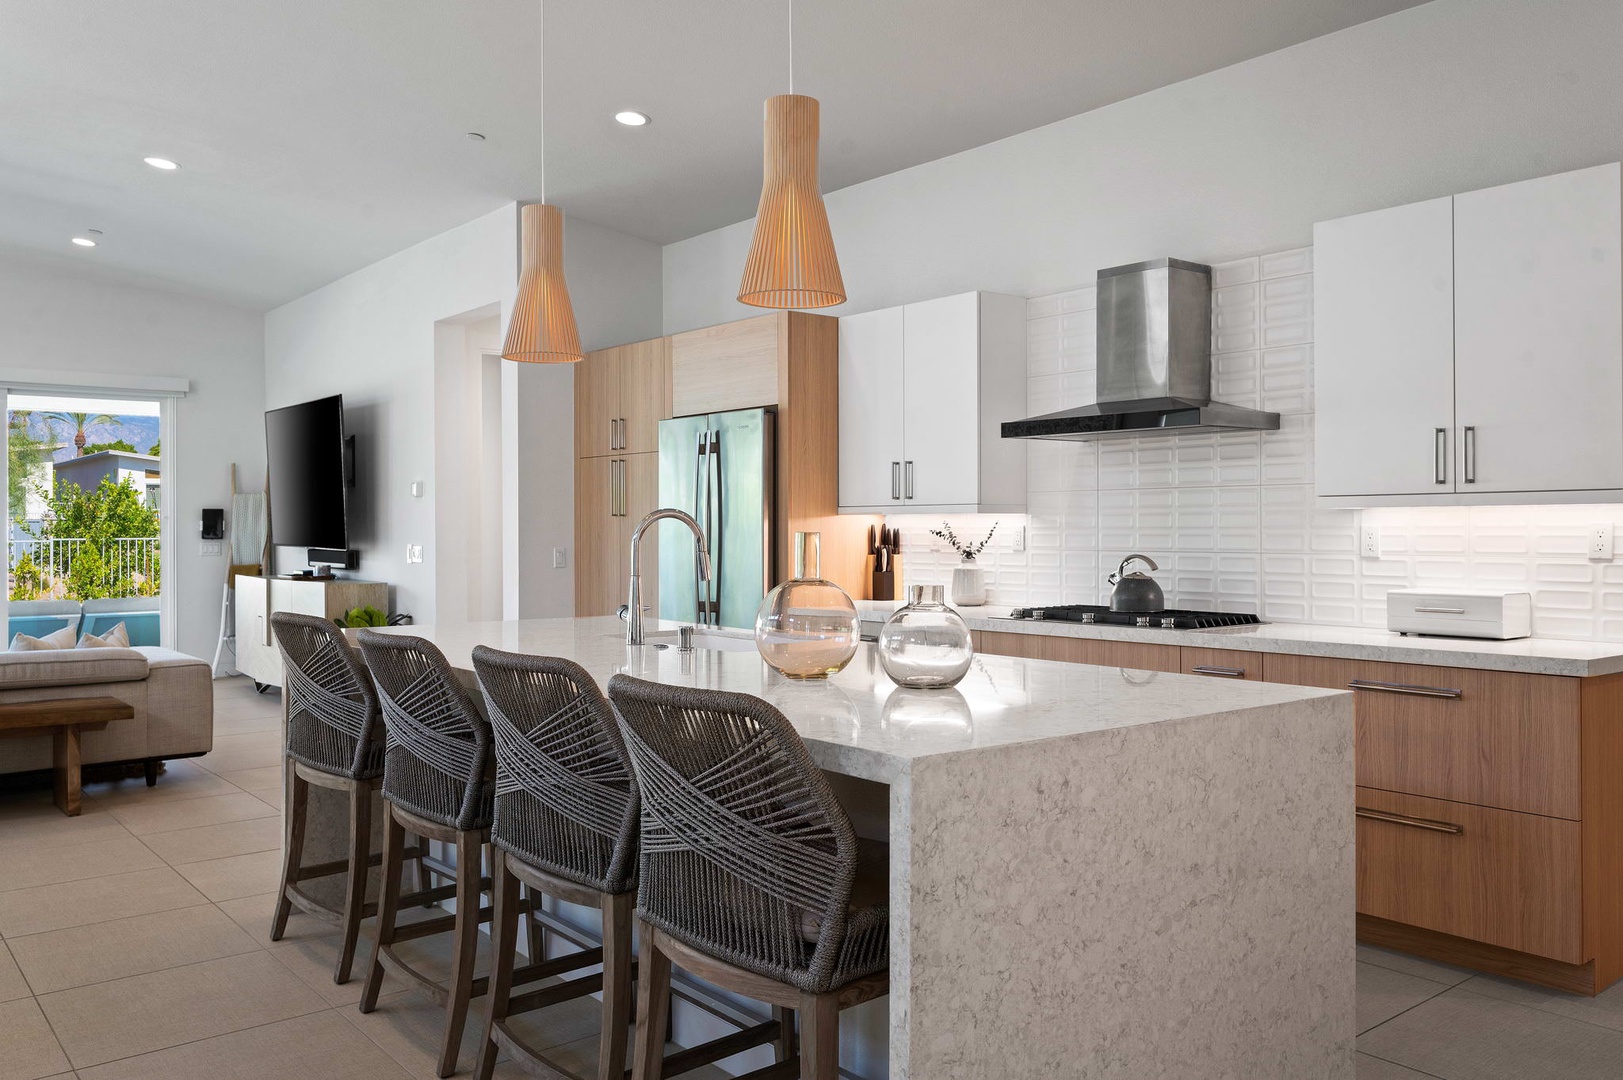 Gourmet kitchen with barstool seating for 4